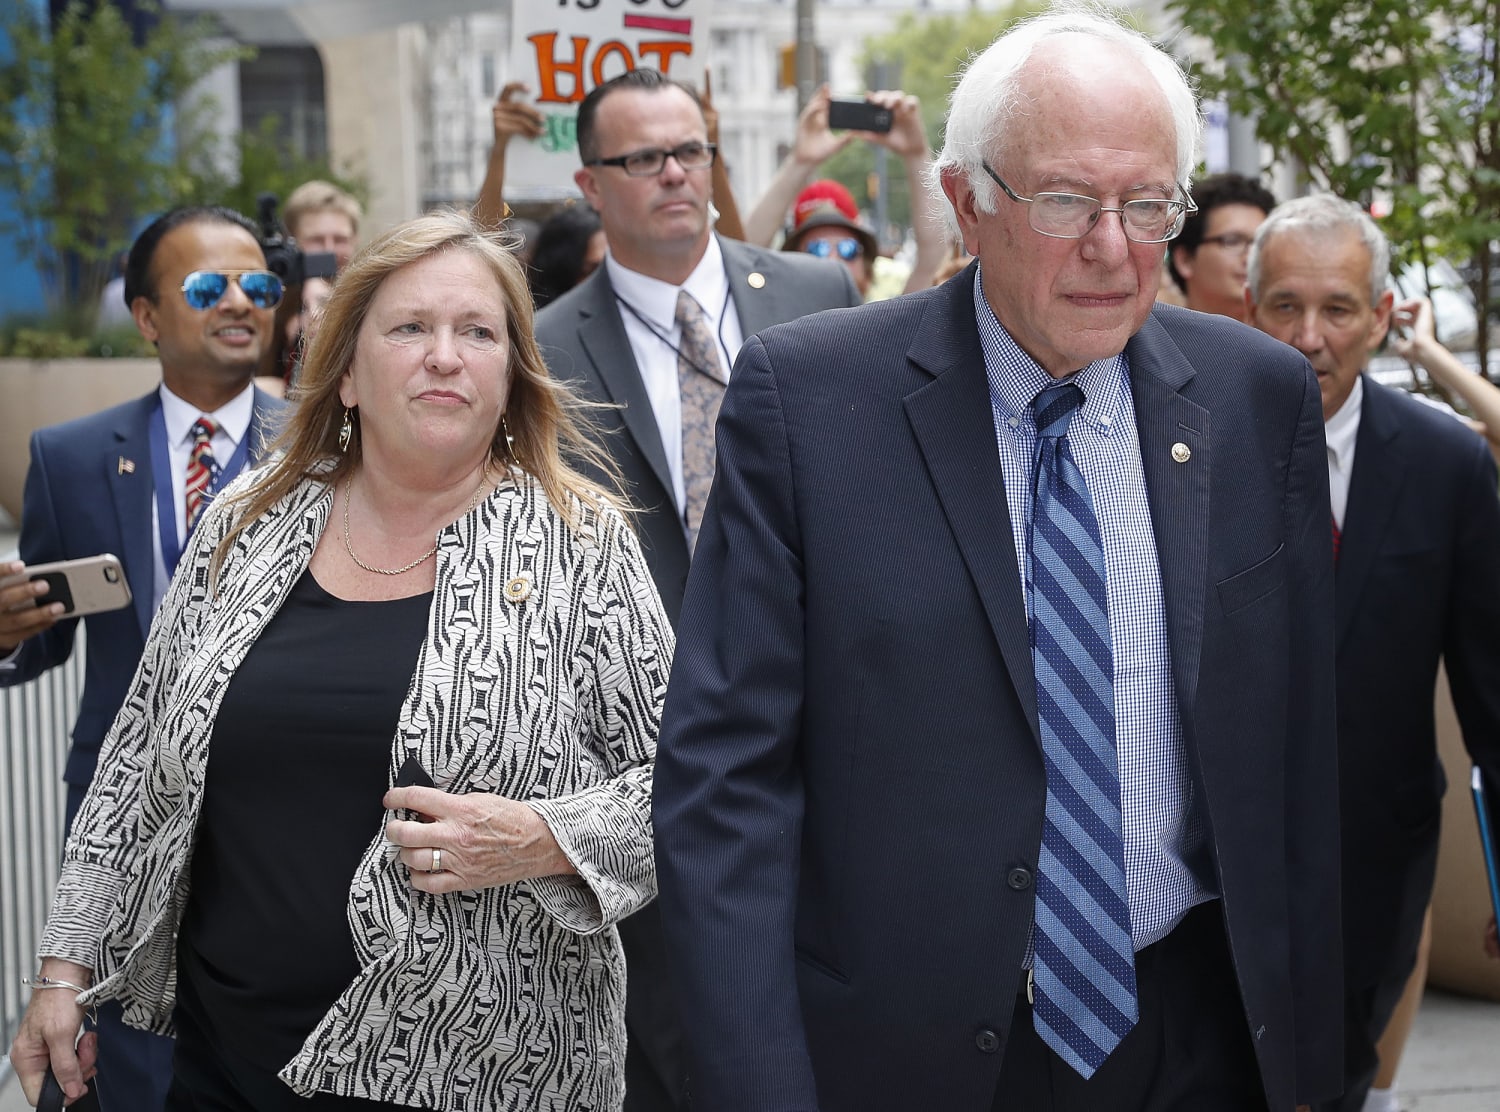 Feds decline to bring charges against Bernie Sanders wife in land deal